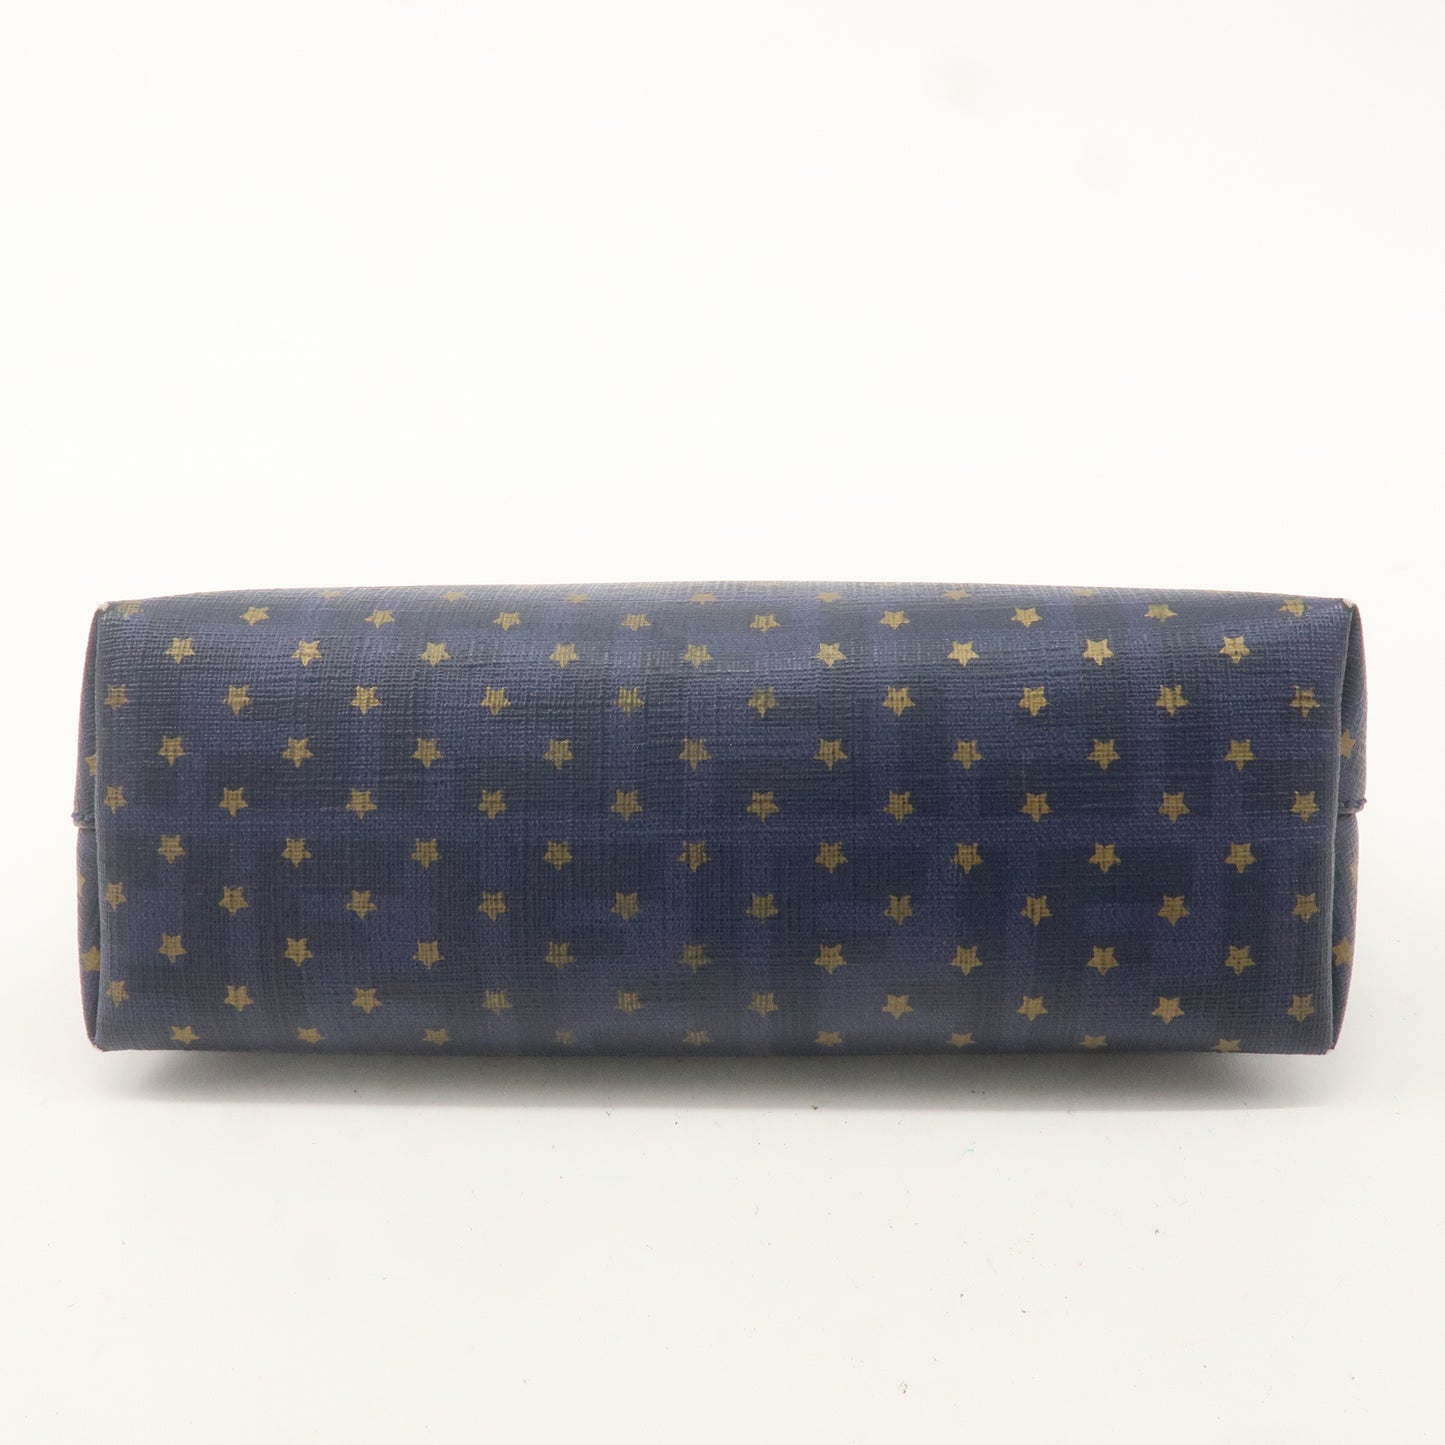 FENDI Zucca PVC Leather Star Print Cosmetic Pouch Navy 7N0038